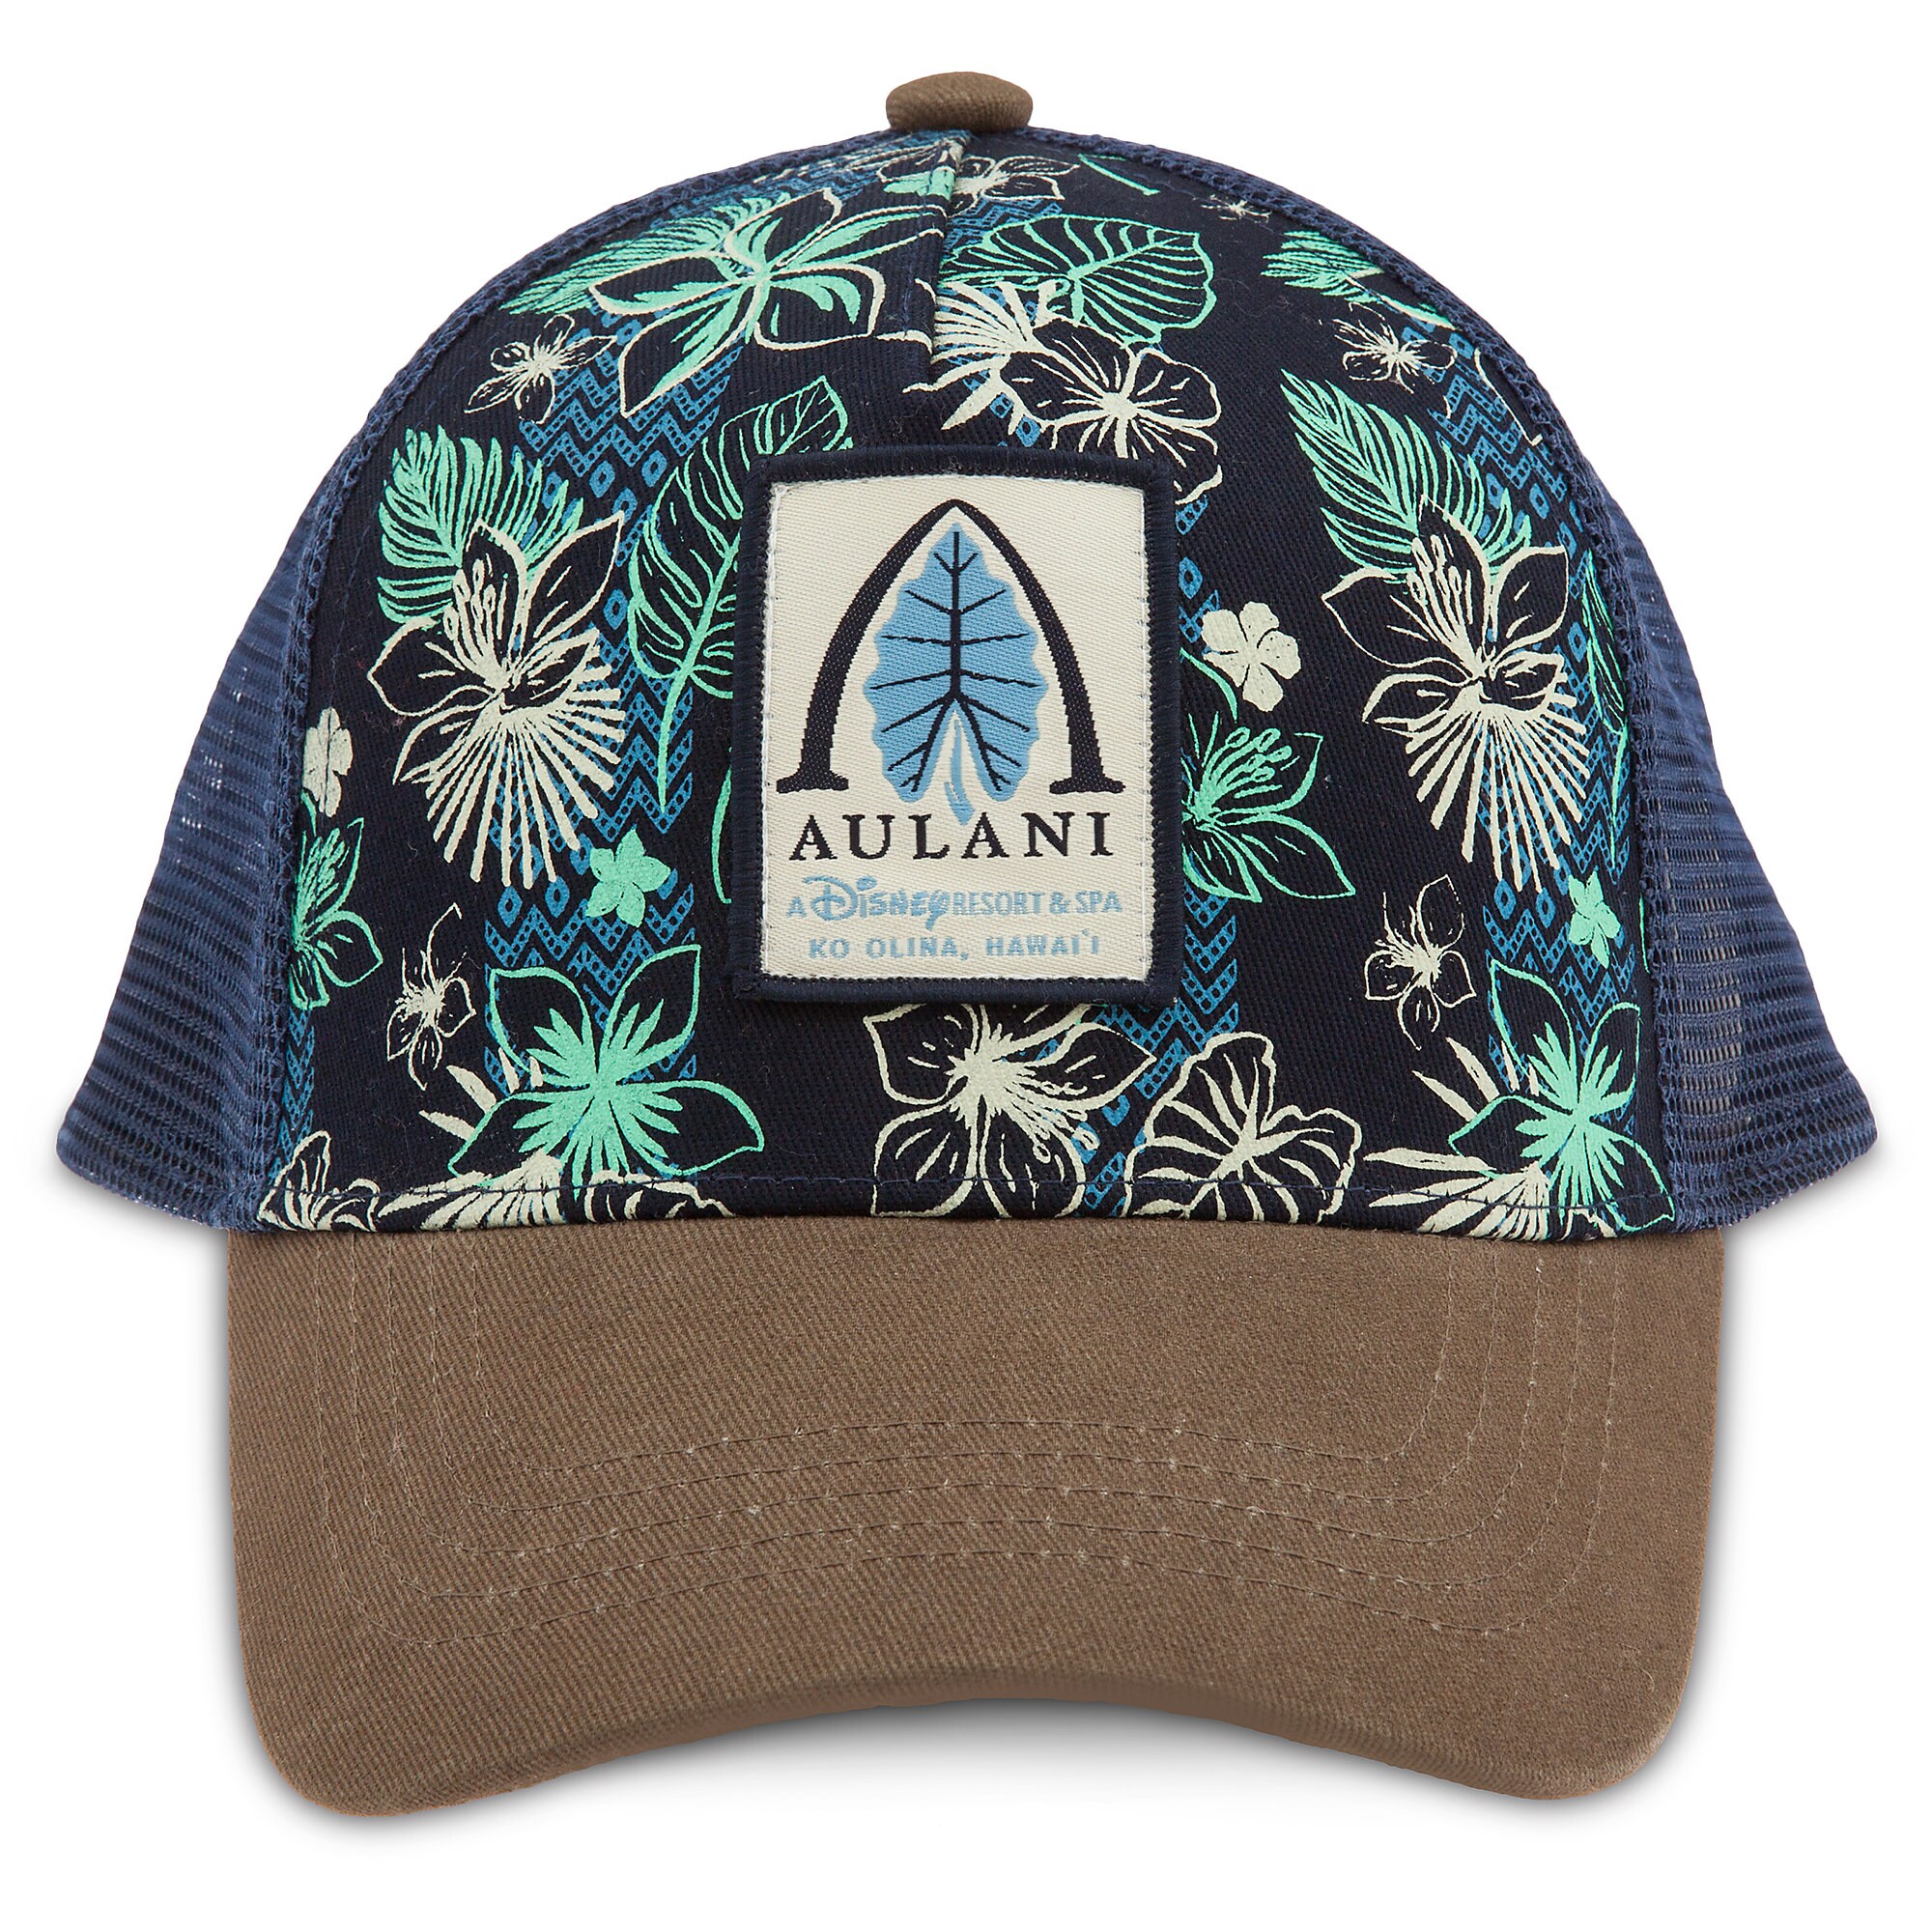 Aulani, A Disney Resort & Spa Trucker Hat for Adults